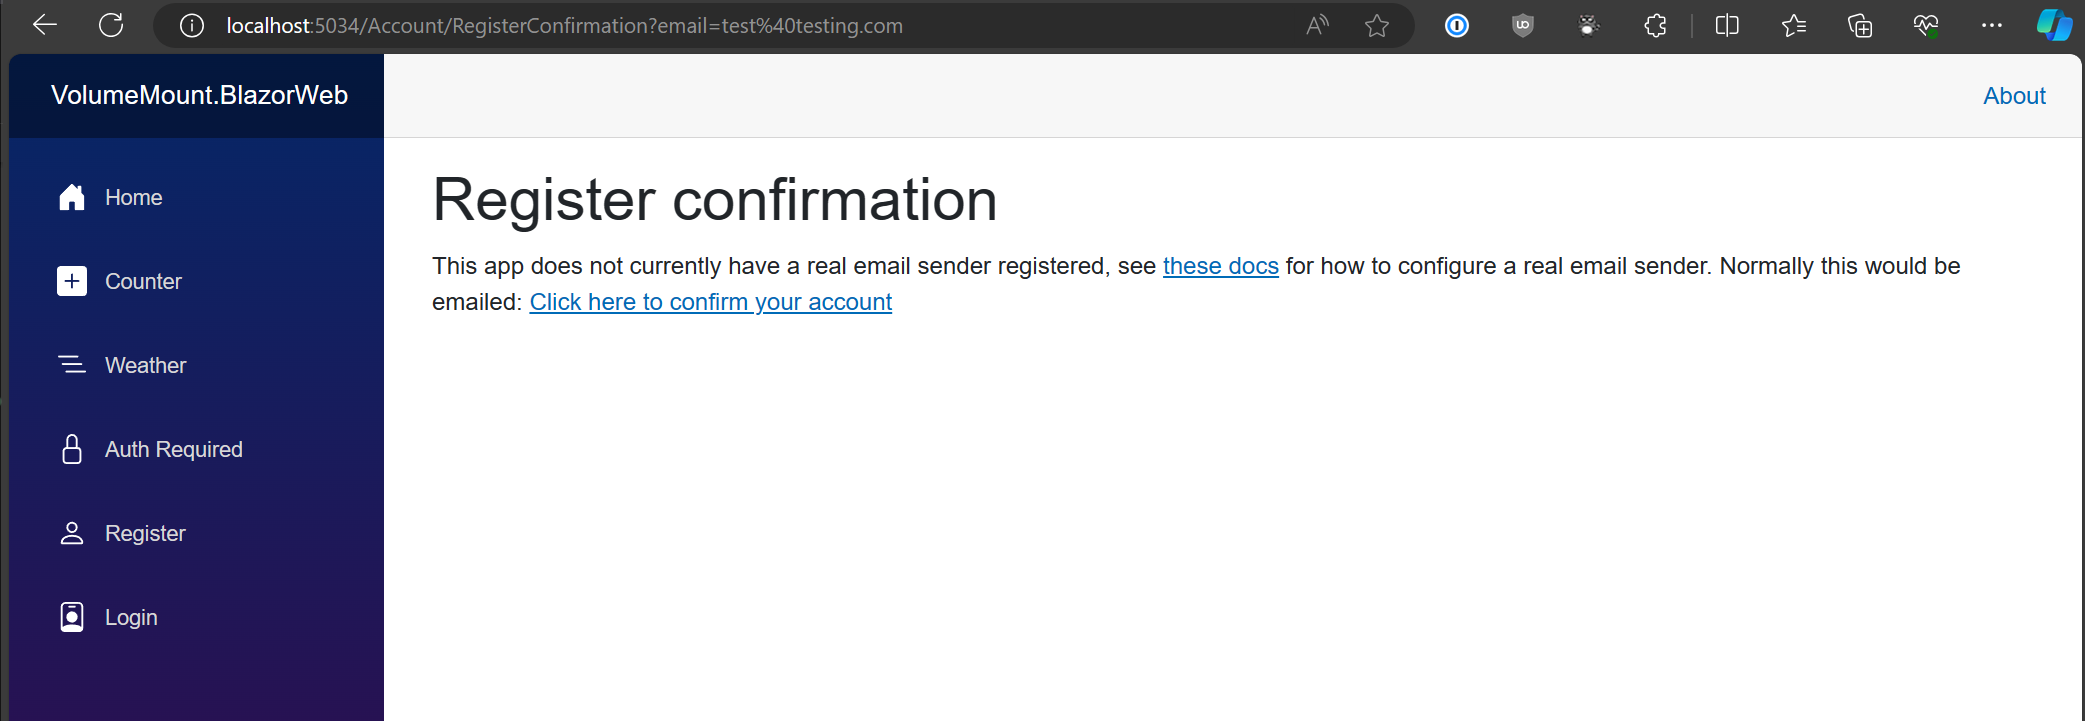 Screenshot of the account registration confirmation page